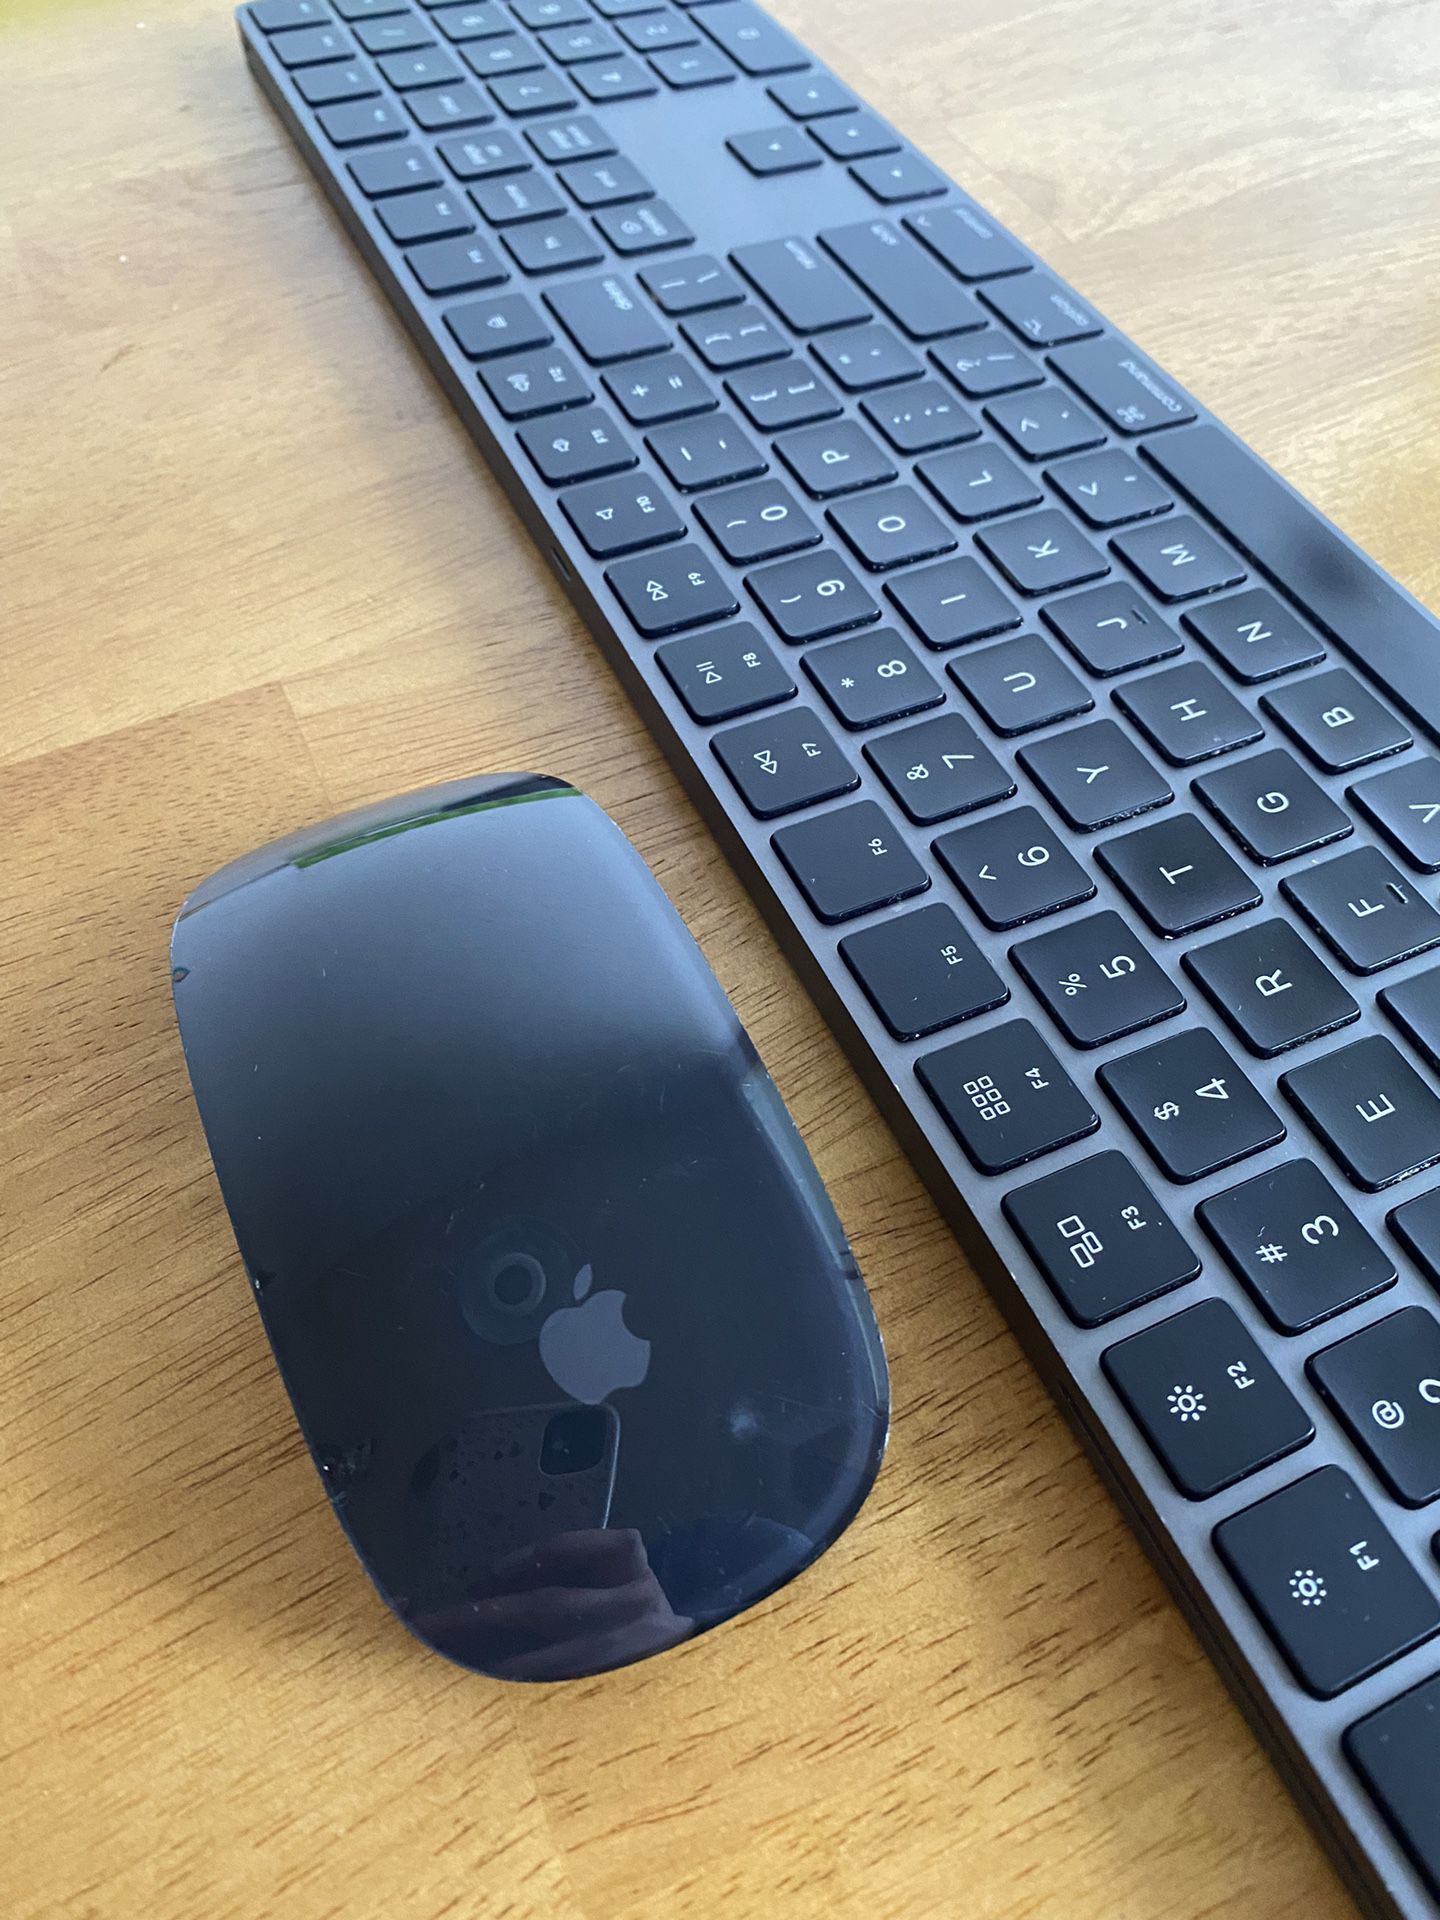 Apple Black Mouse And Keyboard 